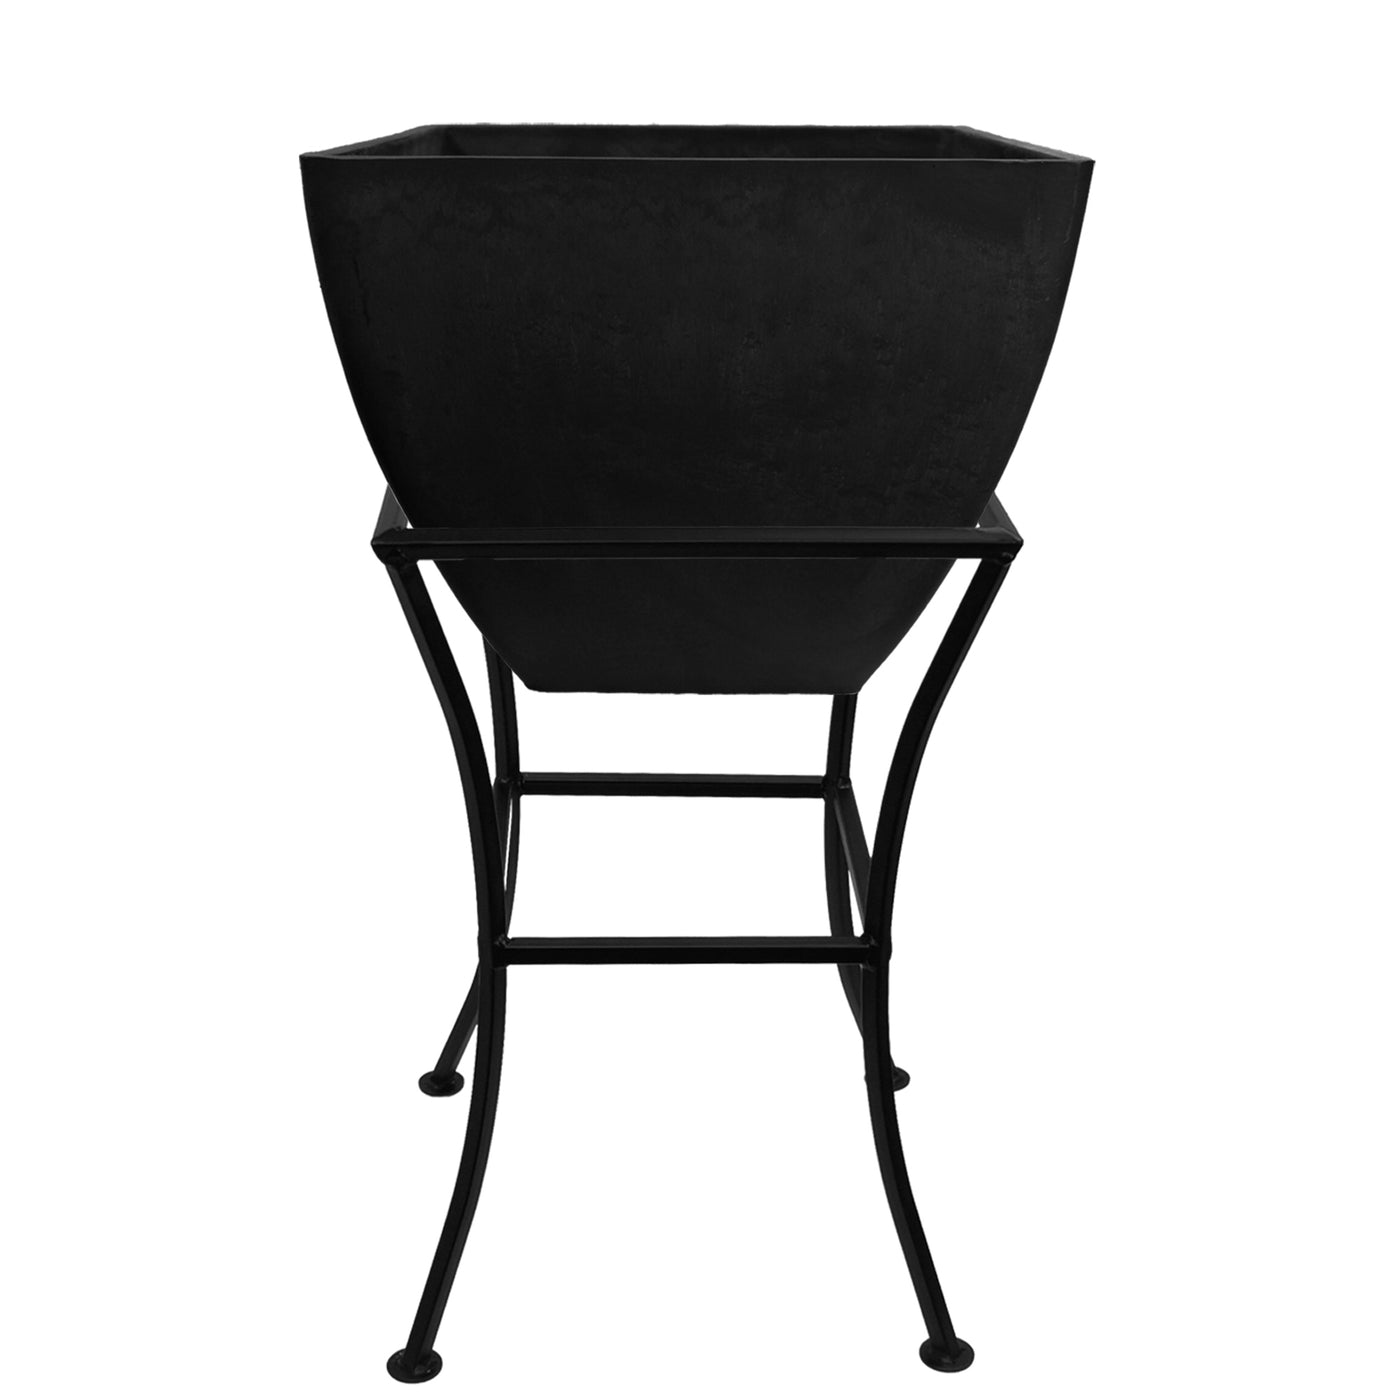 Elevated Square Urban Body Planter with Stand - 16" Square - Graphite - GreenLivingSupply-Store